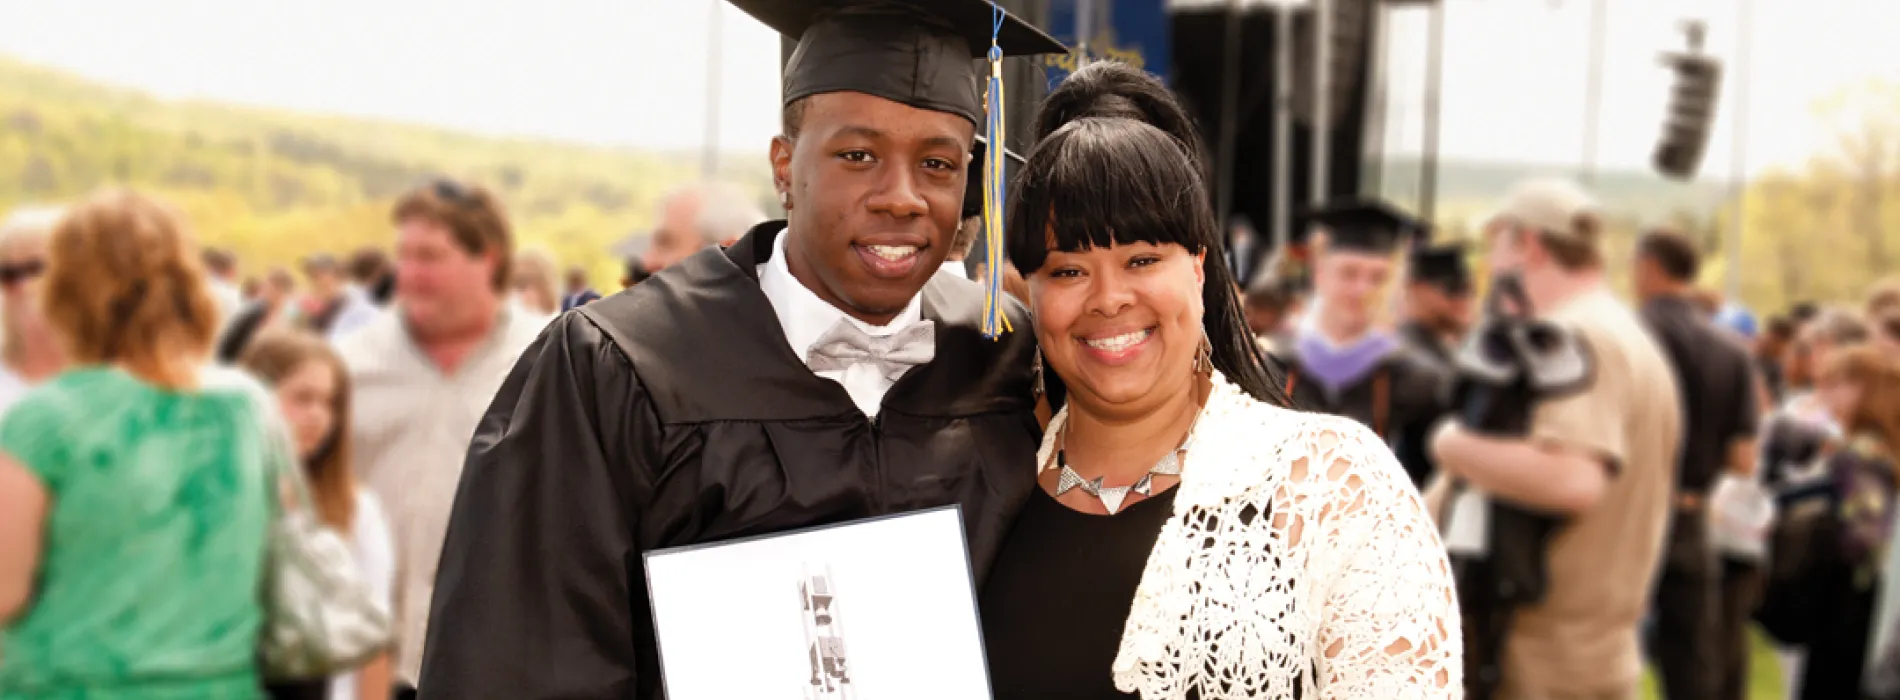 male student wearing commencement cap and gown holding his diploma, with mother